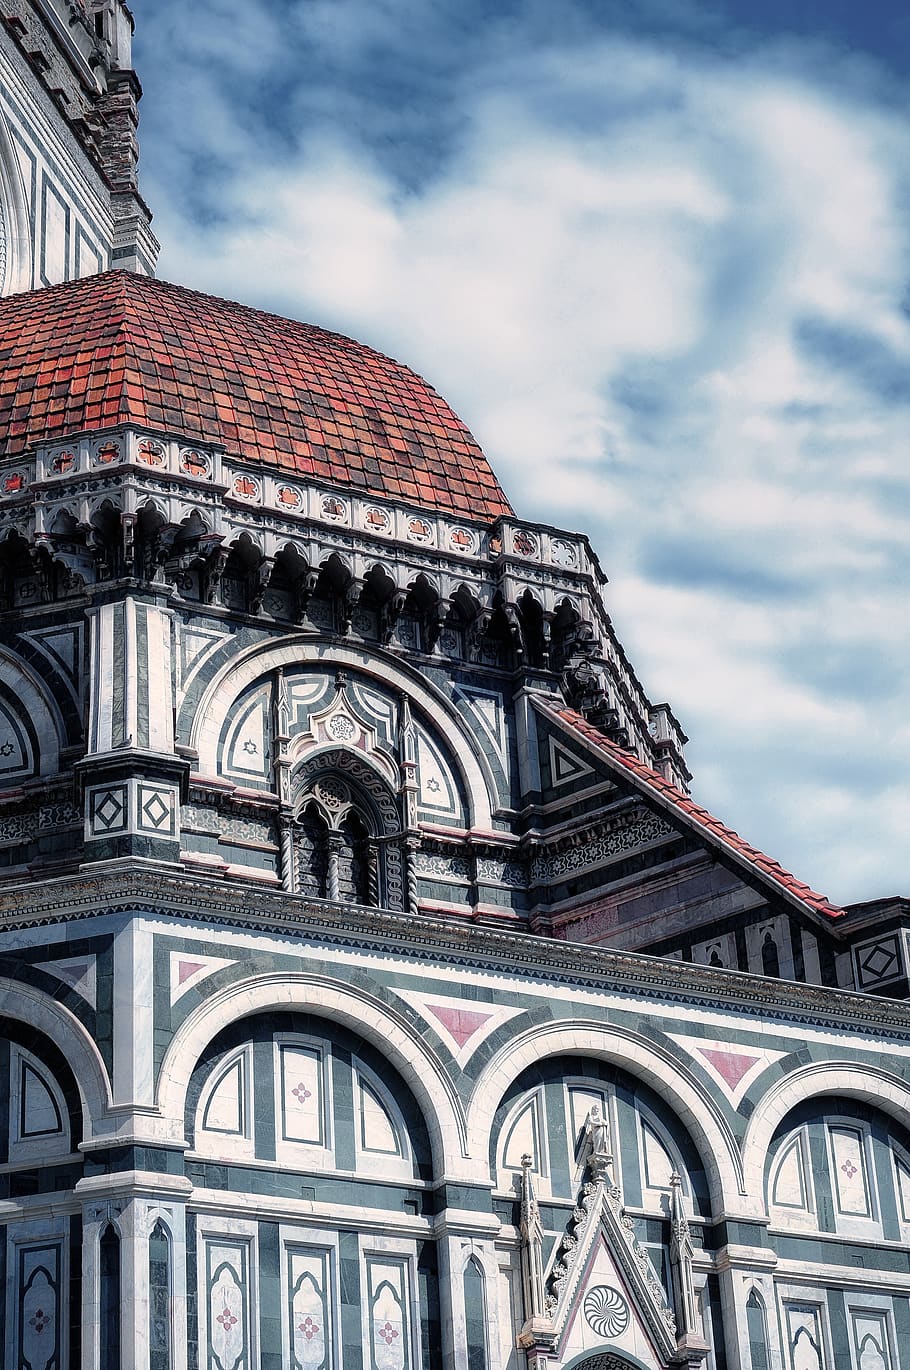 florence, art, italy, holiday, travel, appointed, architecture